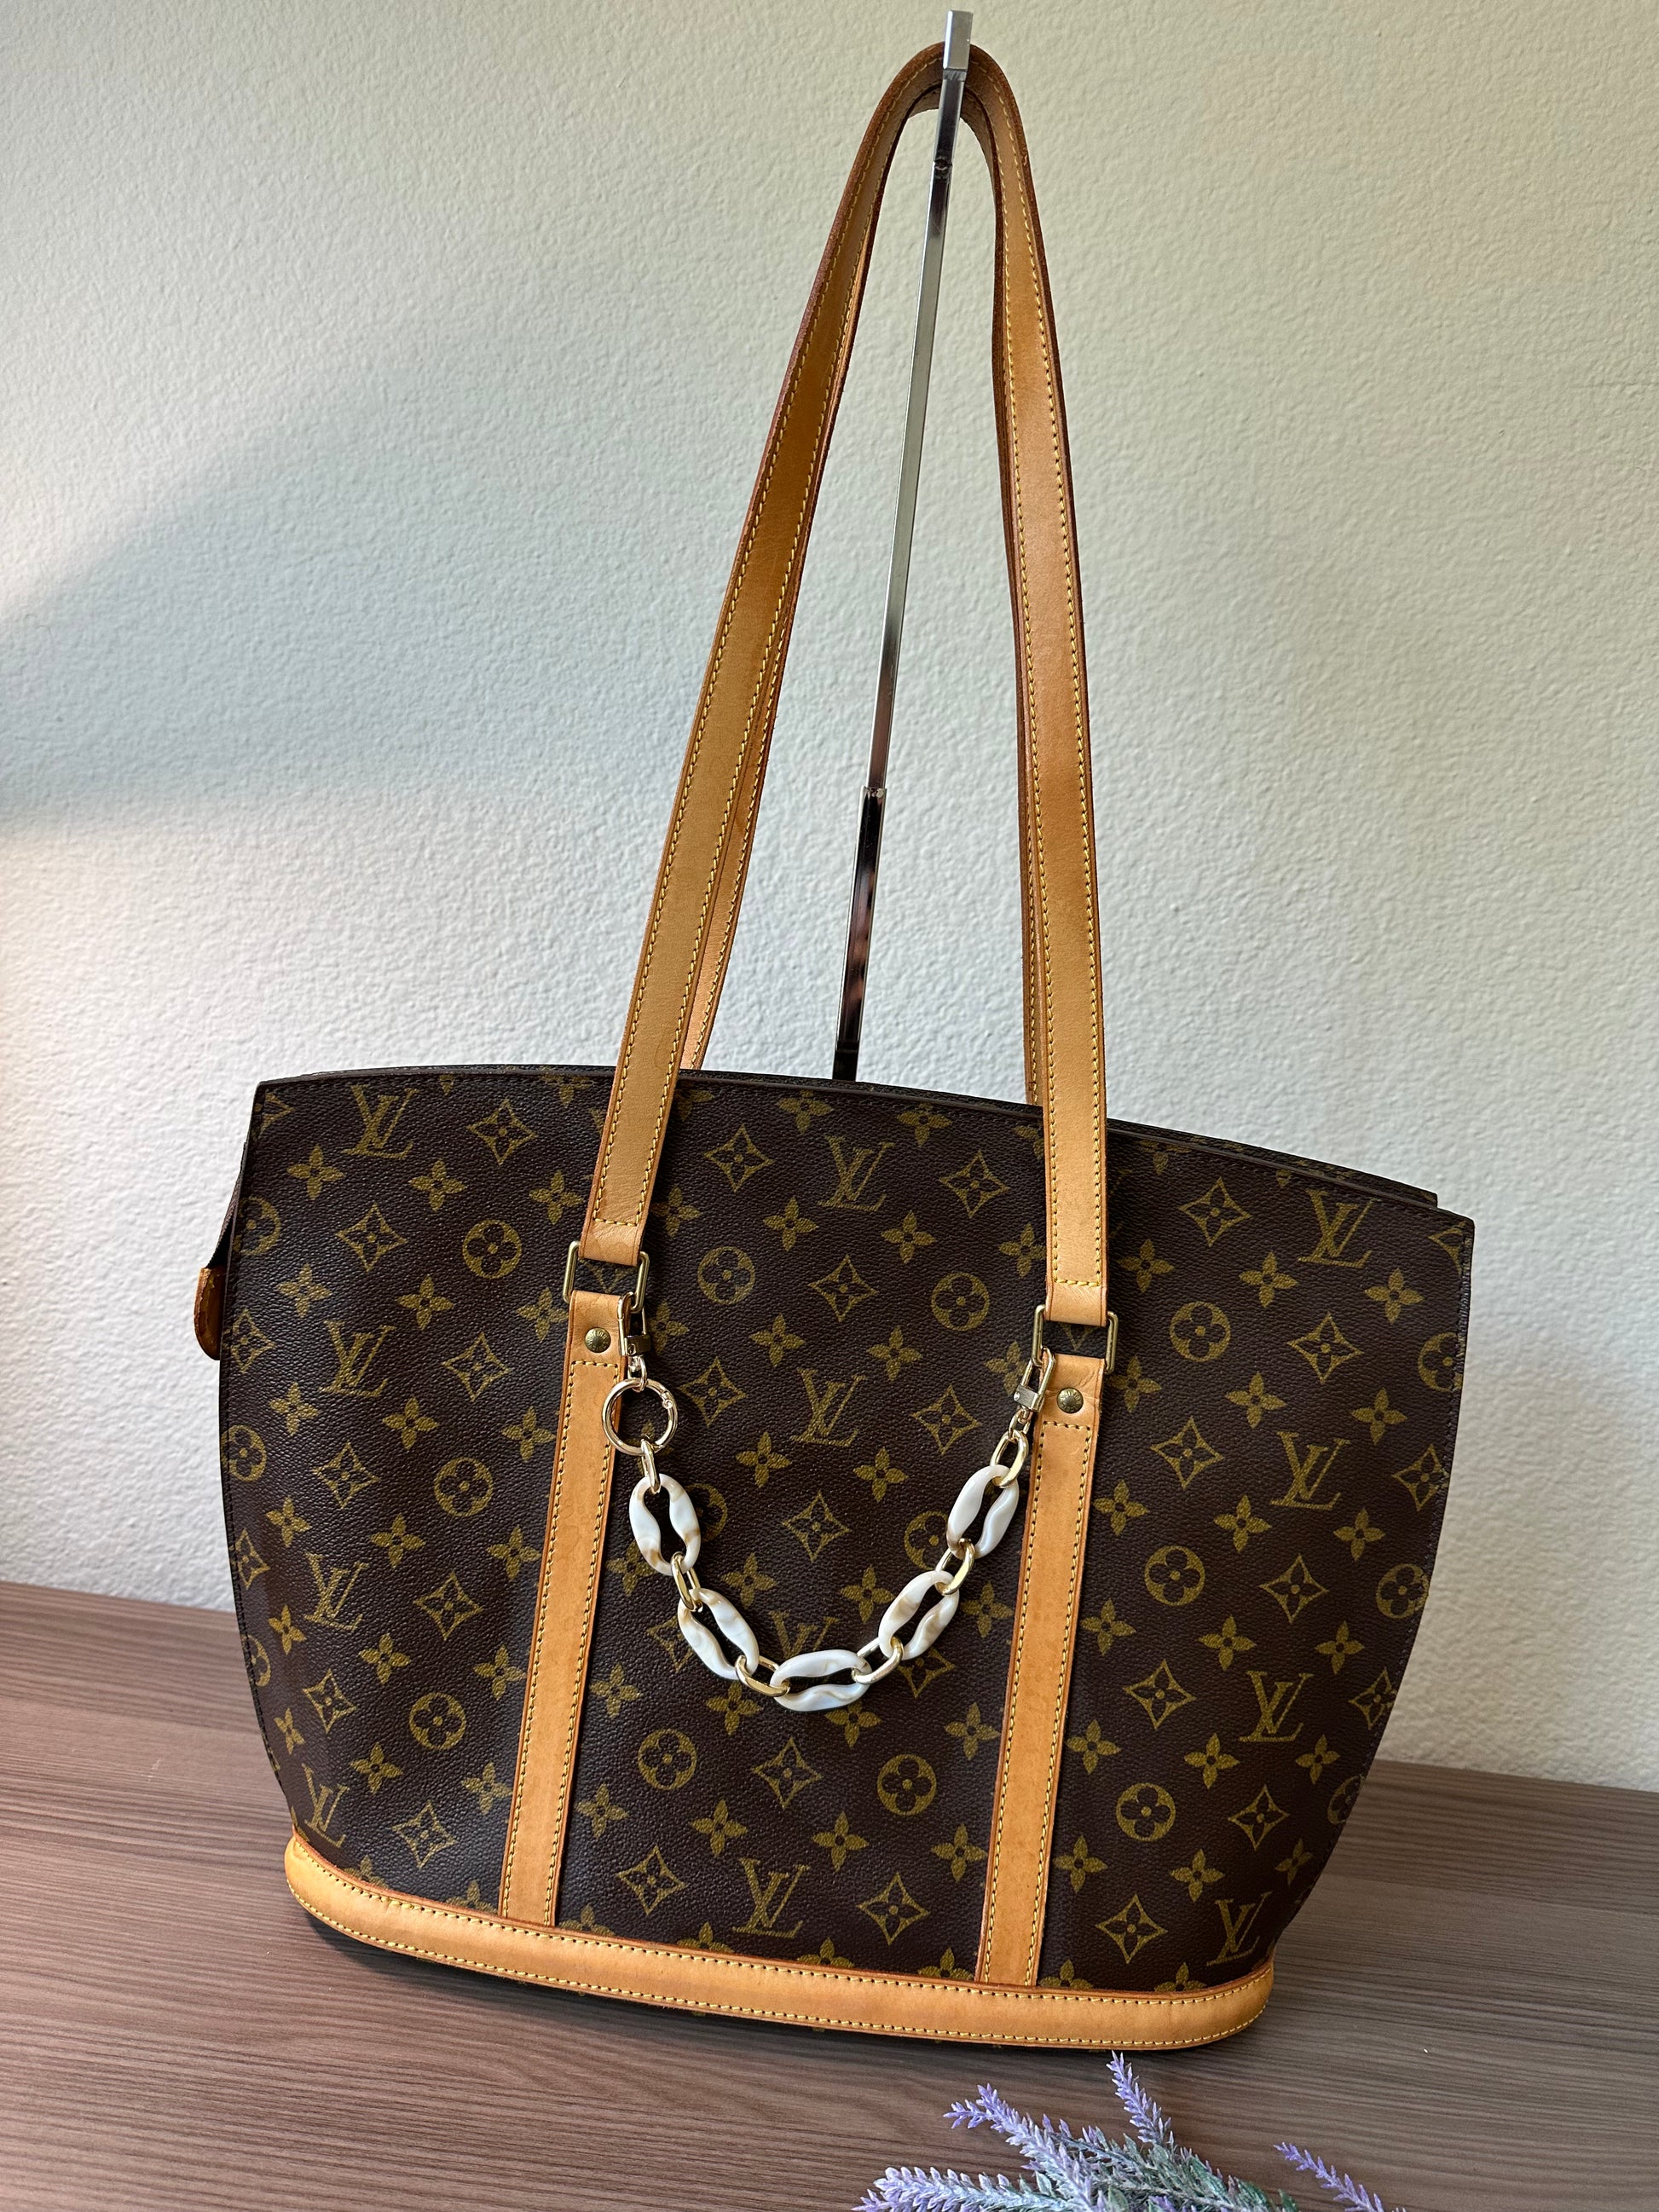 Pre-owned Authentic Louis Vuitton Babylone Monogram Tote Bag